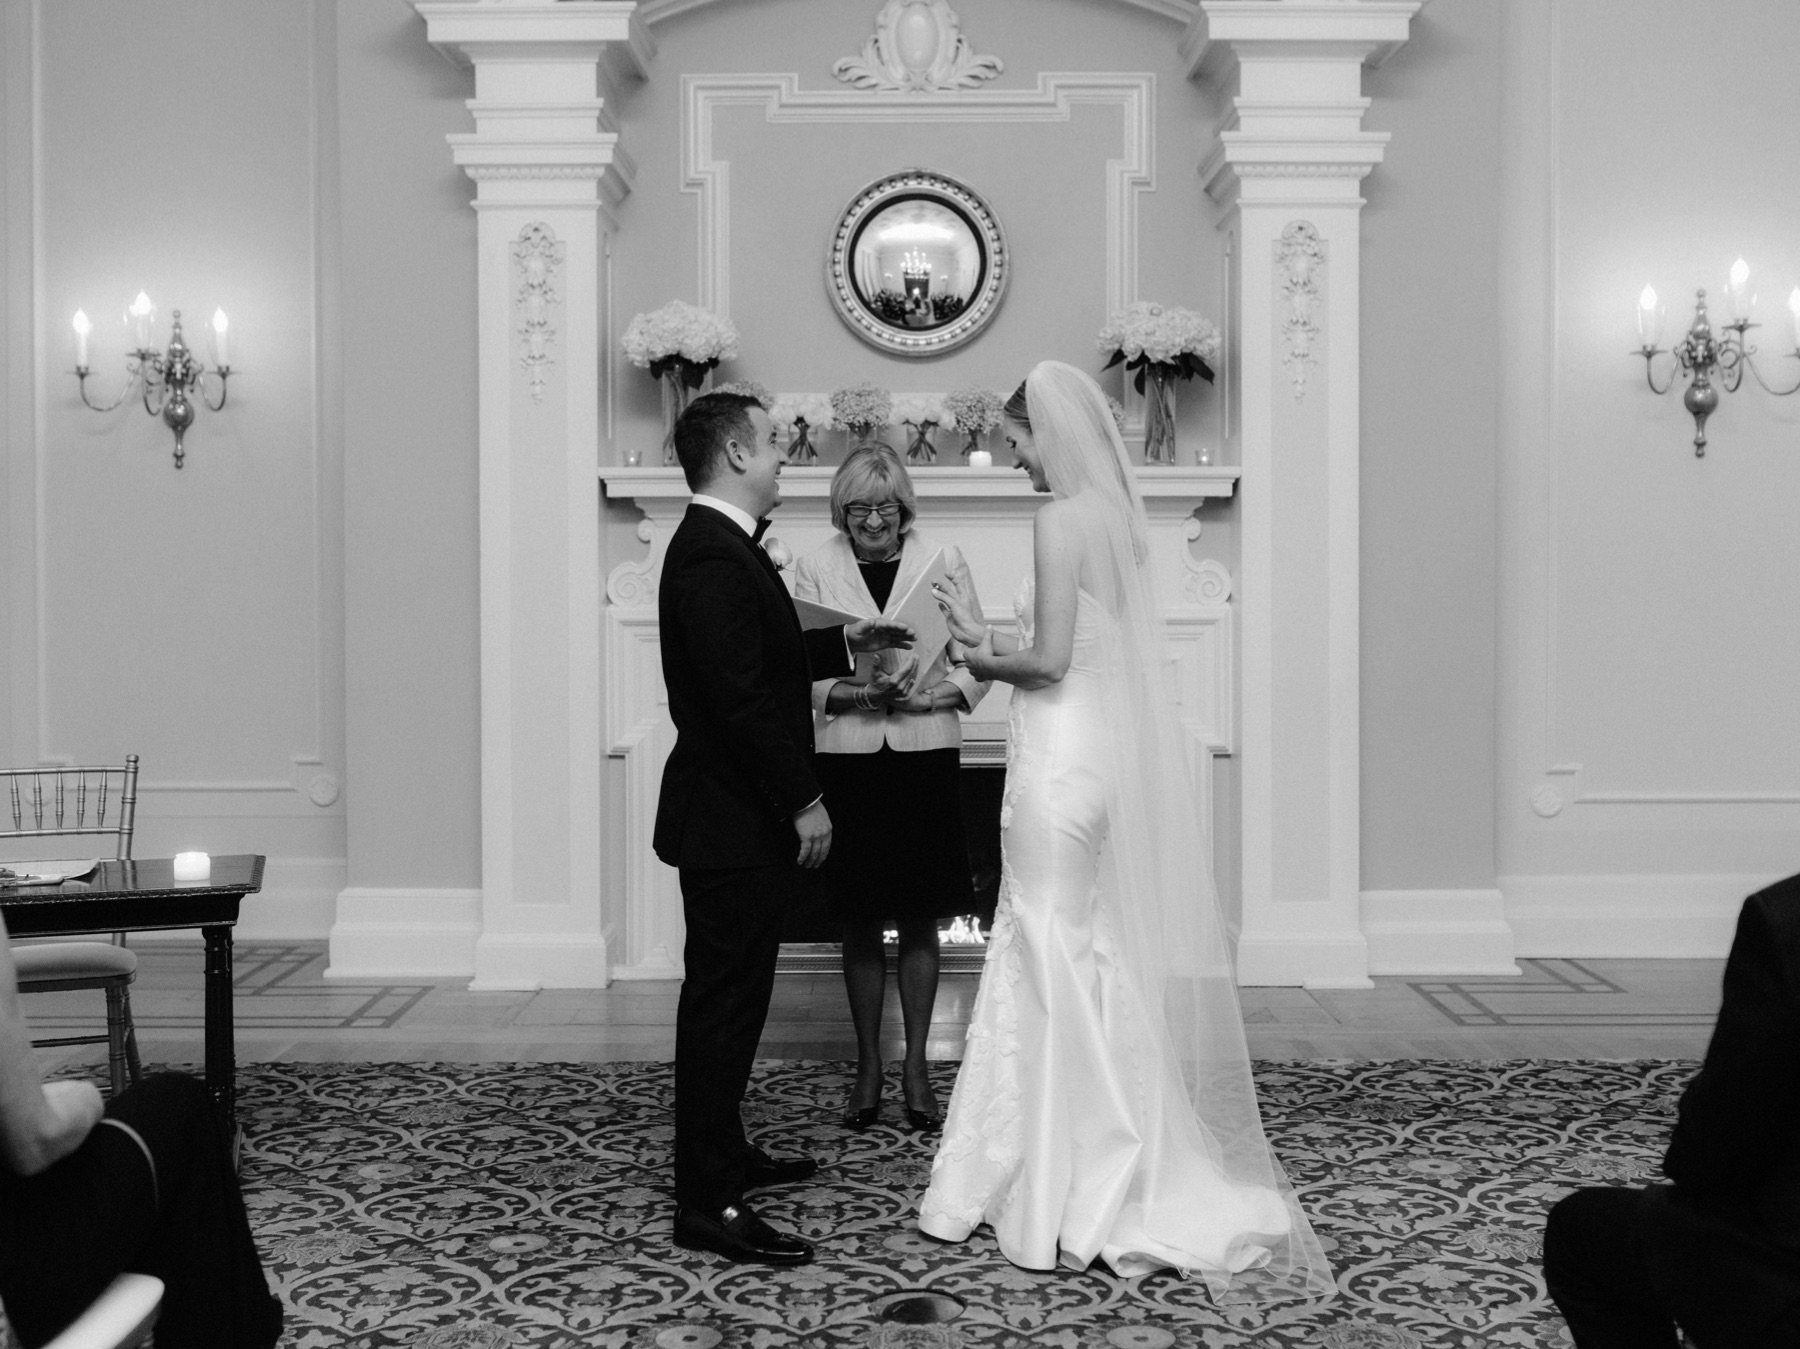 The ring exchange at an intimate classic black tie wedding at The Vancouver Club